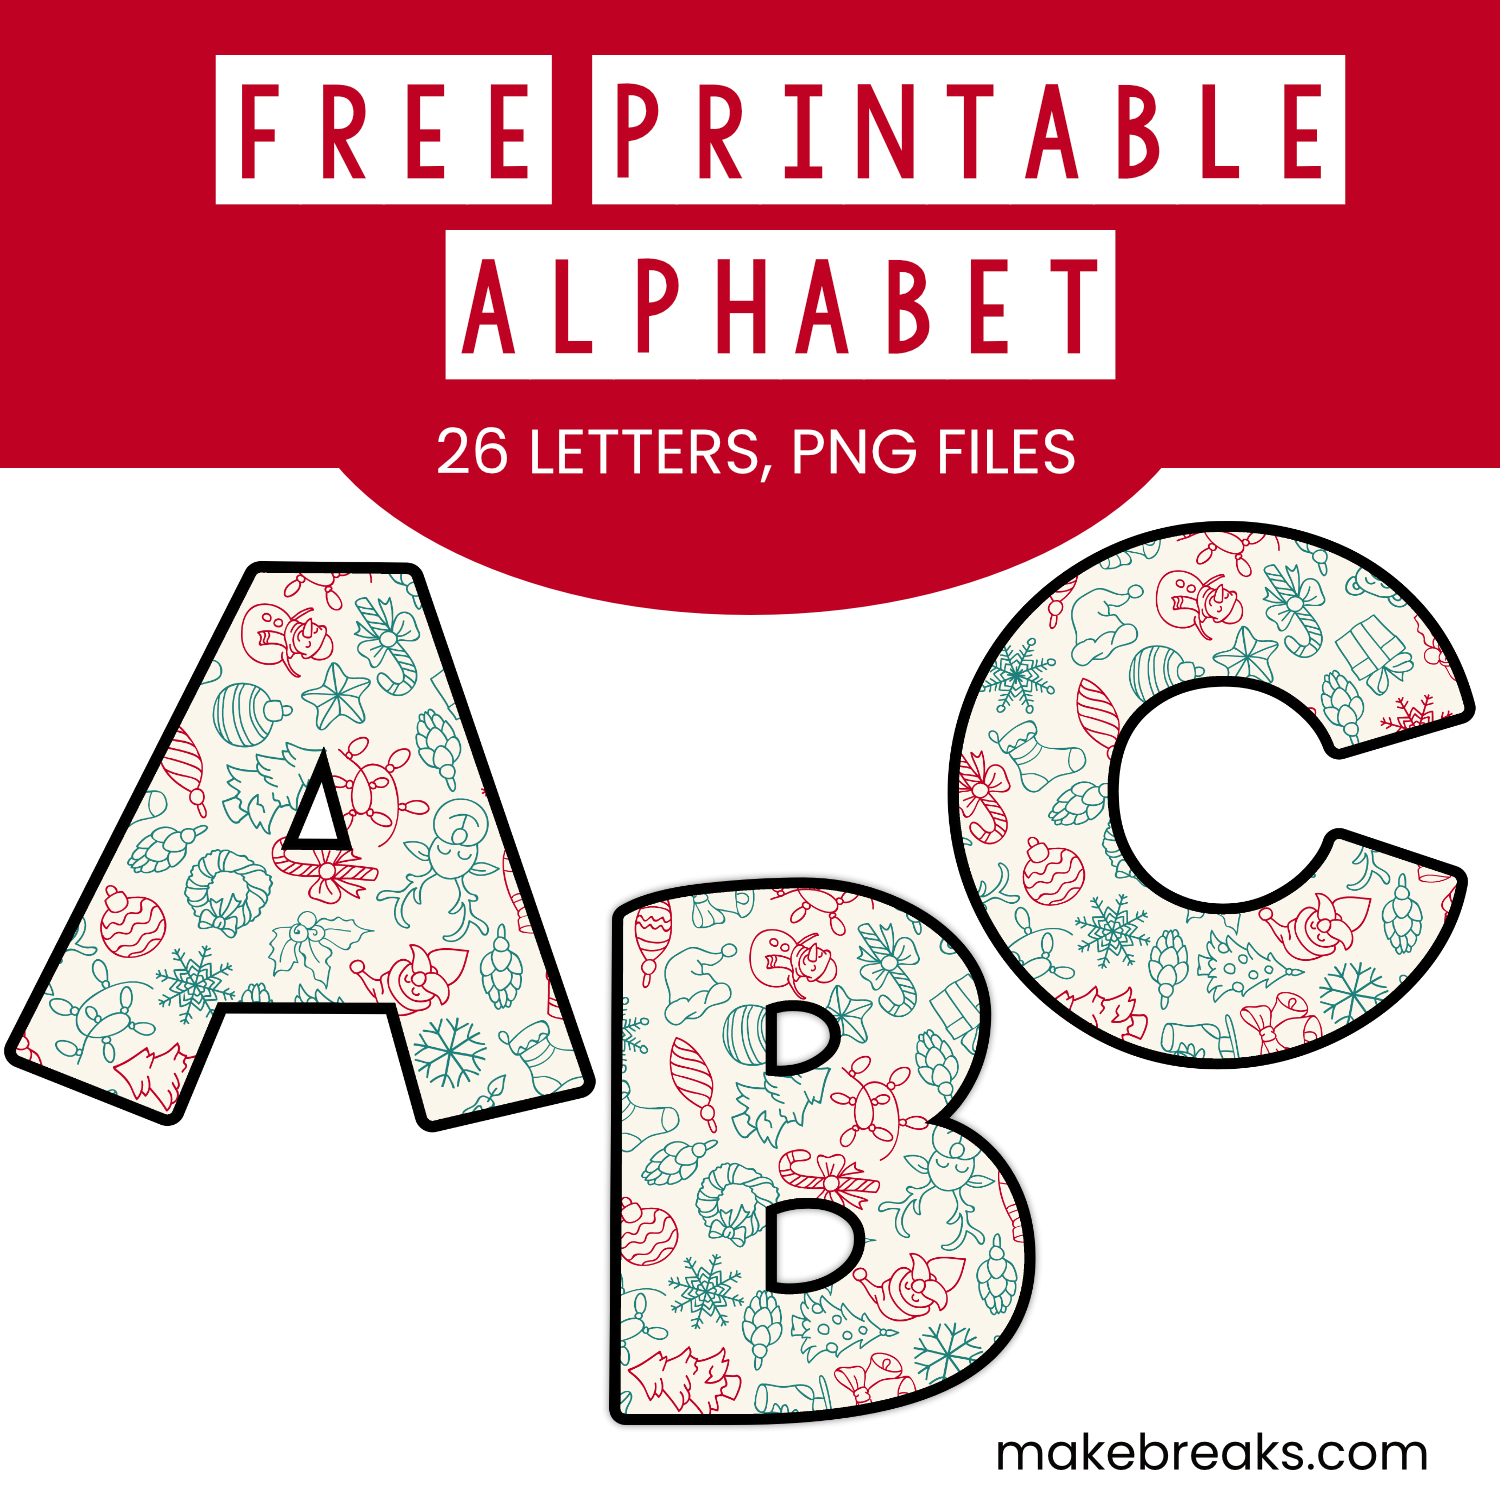 Free Printable Letters / Numbers Archives - Make Breaks - Free Printable Alphabet And Numbers